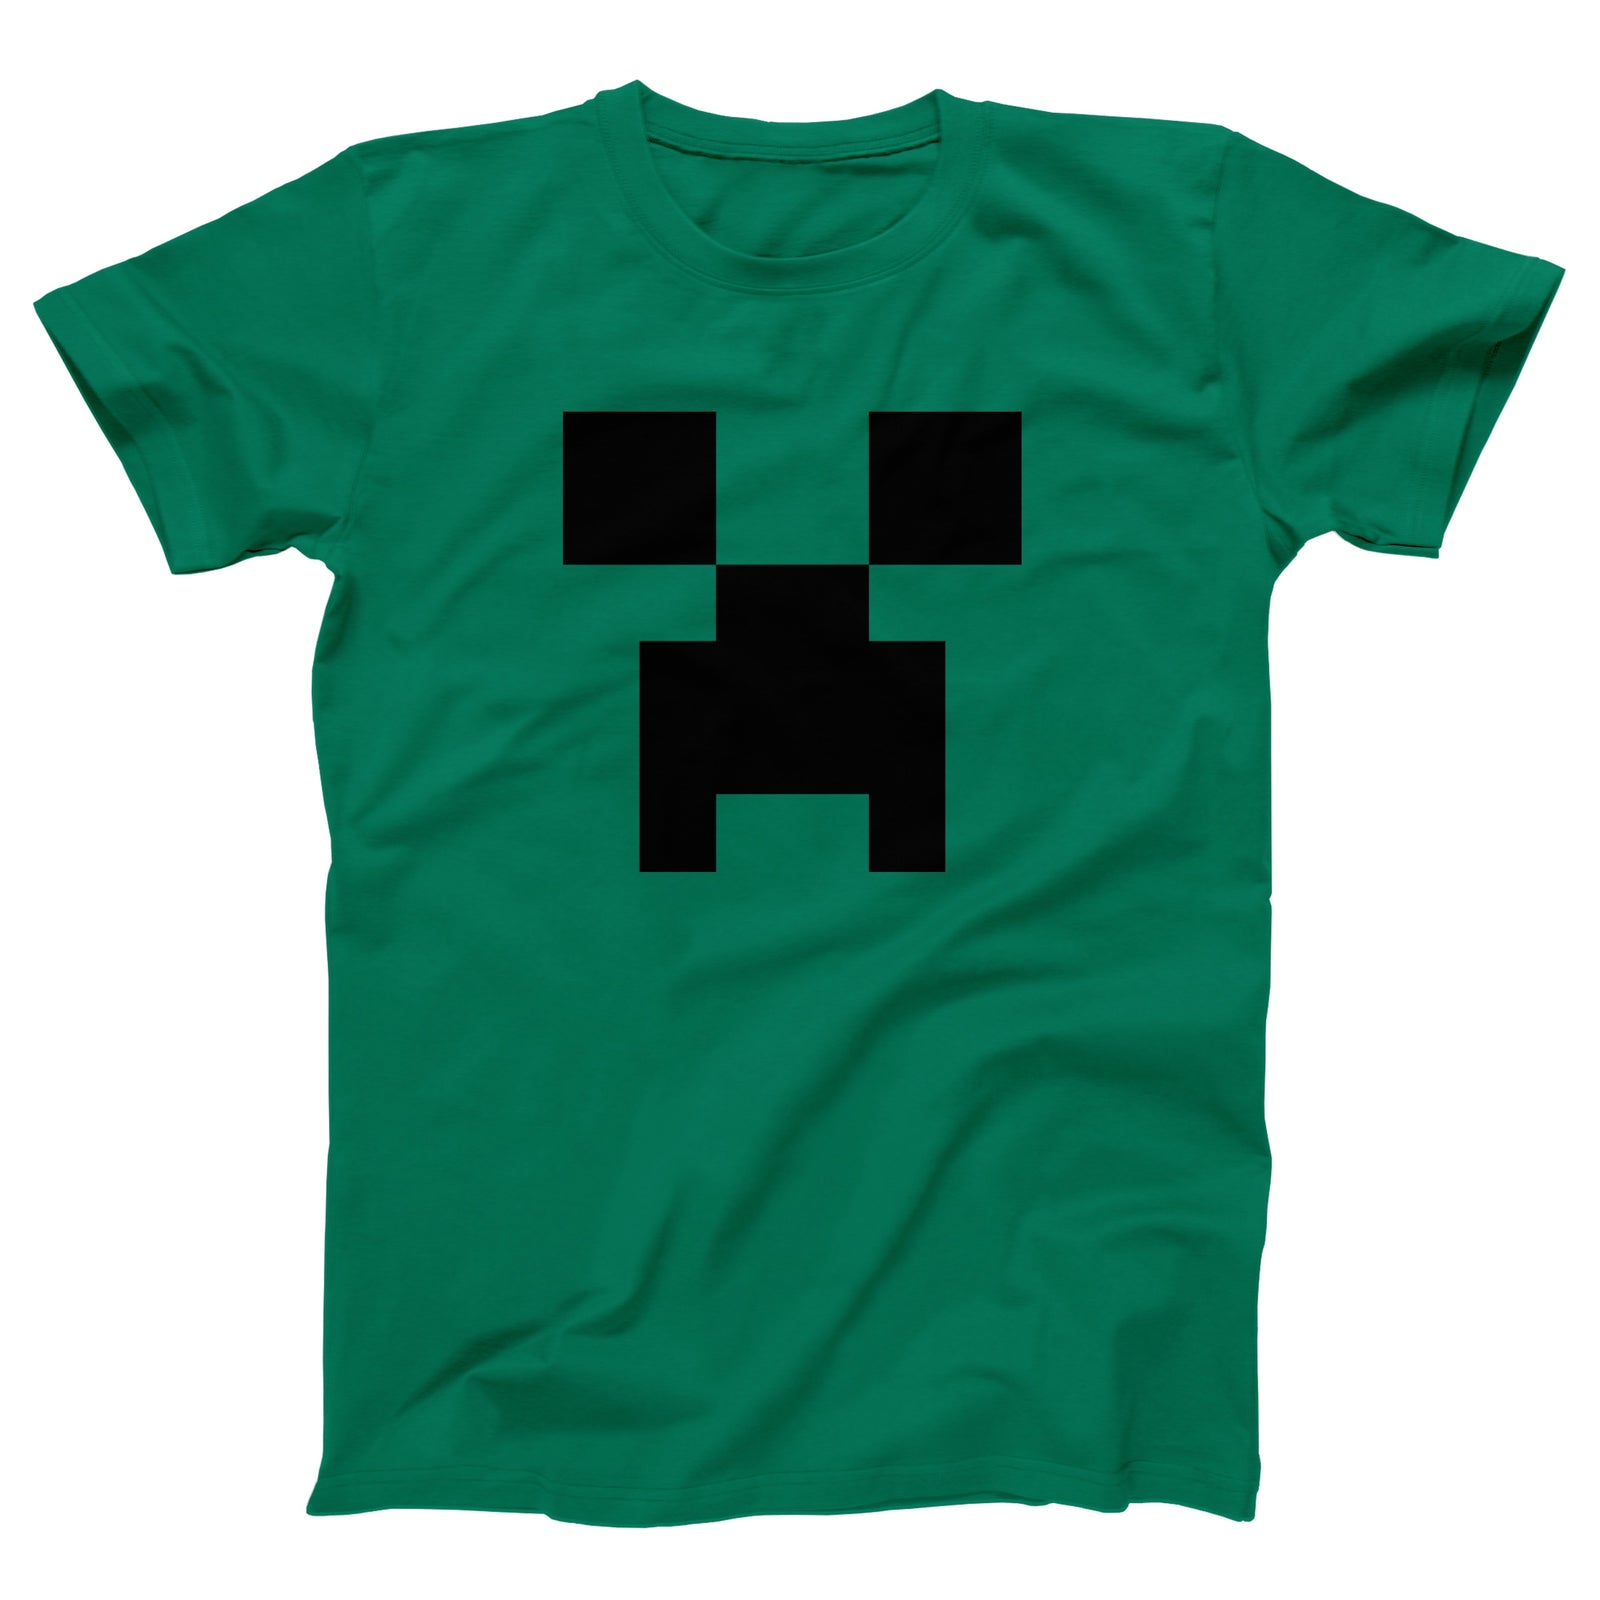 //cdn.shopify.com/s/files/1/0274/2488/2766/products/creeper-menunisex-t-shirt-148943_5000x.jpg?v=1631741173 5000w,
    //cdn.shopify.com/s/files/1/0274/2488/2766/products/creeper-menunisex-t-shirt-148943_4500x.jpg?v=1631741173 4500w,
    //cdn.shopify.com/s/files/1/0274/2488/2766/products/creeper-menunisex-t-shirt-148943_4000x.jpg?v=1631741173 4000w,
    //cdn.shopify.com/s/files/1/0274/2488/2766/products/creeper-menunisex-t-shirt-148943_3500x.jpg?v=1631741173 3500w,
    //cdn.shopify.com/s/files/1/0274/2488/2766/products/creeper-menunisex-t-shirt-148943_3000x.jpg?v=1631741173 3000w,
    //cdn.shopify.com/s/files/1/0274/2488/2766/products/creeper-menunisex-t-shirt-148943_2500x.jpg?v=1631741173 2500w,
    //cdn.shopify.com/s/files/1/0274/2488/2766/products/creeper-menunisex-t-shirt-148943_2000x.jpg?v=1631741173 2000w,
    //cdn.shopify.com/s/files/1/0274/2488/2766/products/creeper-menunisex-t-shirt-148943_1800x.jpg?v=1631741173 1800w,
    //cdn.shopify.com/s/files/1/0274/2488/2766/products/creeper-menunisex-t-shirt-148943_1600x.jpg?v=1631741173 1600w,
    //cdn.shopify.com/s/files/1/0274/2488/2766/products/creeper-menunisex-t-shirt-148943_1400x.jpg?v=1631741173 1400w,
    //cdn.shopify.com/s/files/1/0274/2488/2766/products/creeper-menunisex-t-shirt-148943_1200x.jpg?v=1631741173 1200w,
    //cdn.shopify.com/s/files/1/0274/2488/2766/products/creeper-menunisex-t-shirt-148943_1000x.jpg?v=1631741173 1000w,
    //cdn.shopify.com/s/files/1/0274/2488/2766/products/creeper-menunisex-t-shirt-148943_800x.jpg?v=1631741173 800w,
    //cdn.shopify.com/s/files/1/0274/2488/2766/products/creeper-menunisex-t-shirt-148943_600x.jpg?v=1631741173 600w,
    //cdn.shopify.com/s/files/1/0274/2488/2766/products/creeper-menunisex-t-shirt-148943_400x.jpg?v=1631741173 400w,
    //cdn.shopify.com/s/files/1/0274/2488/2766/products/creeper-menunisex-t-shirt-148943_200x.jpg?v=1631741173 200w